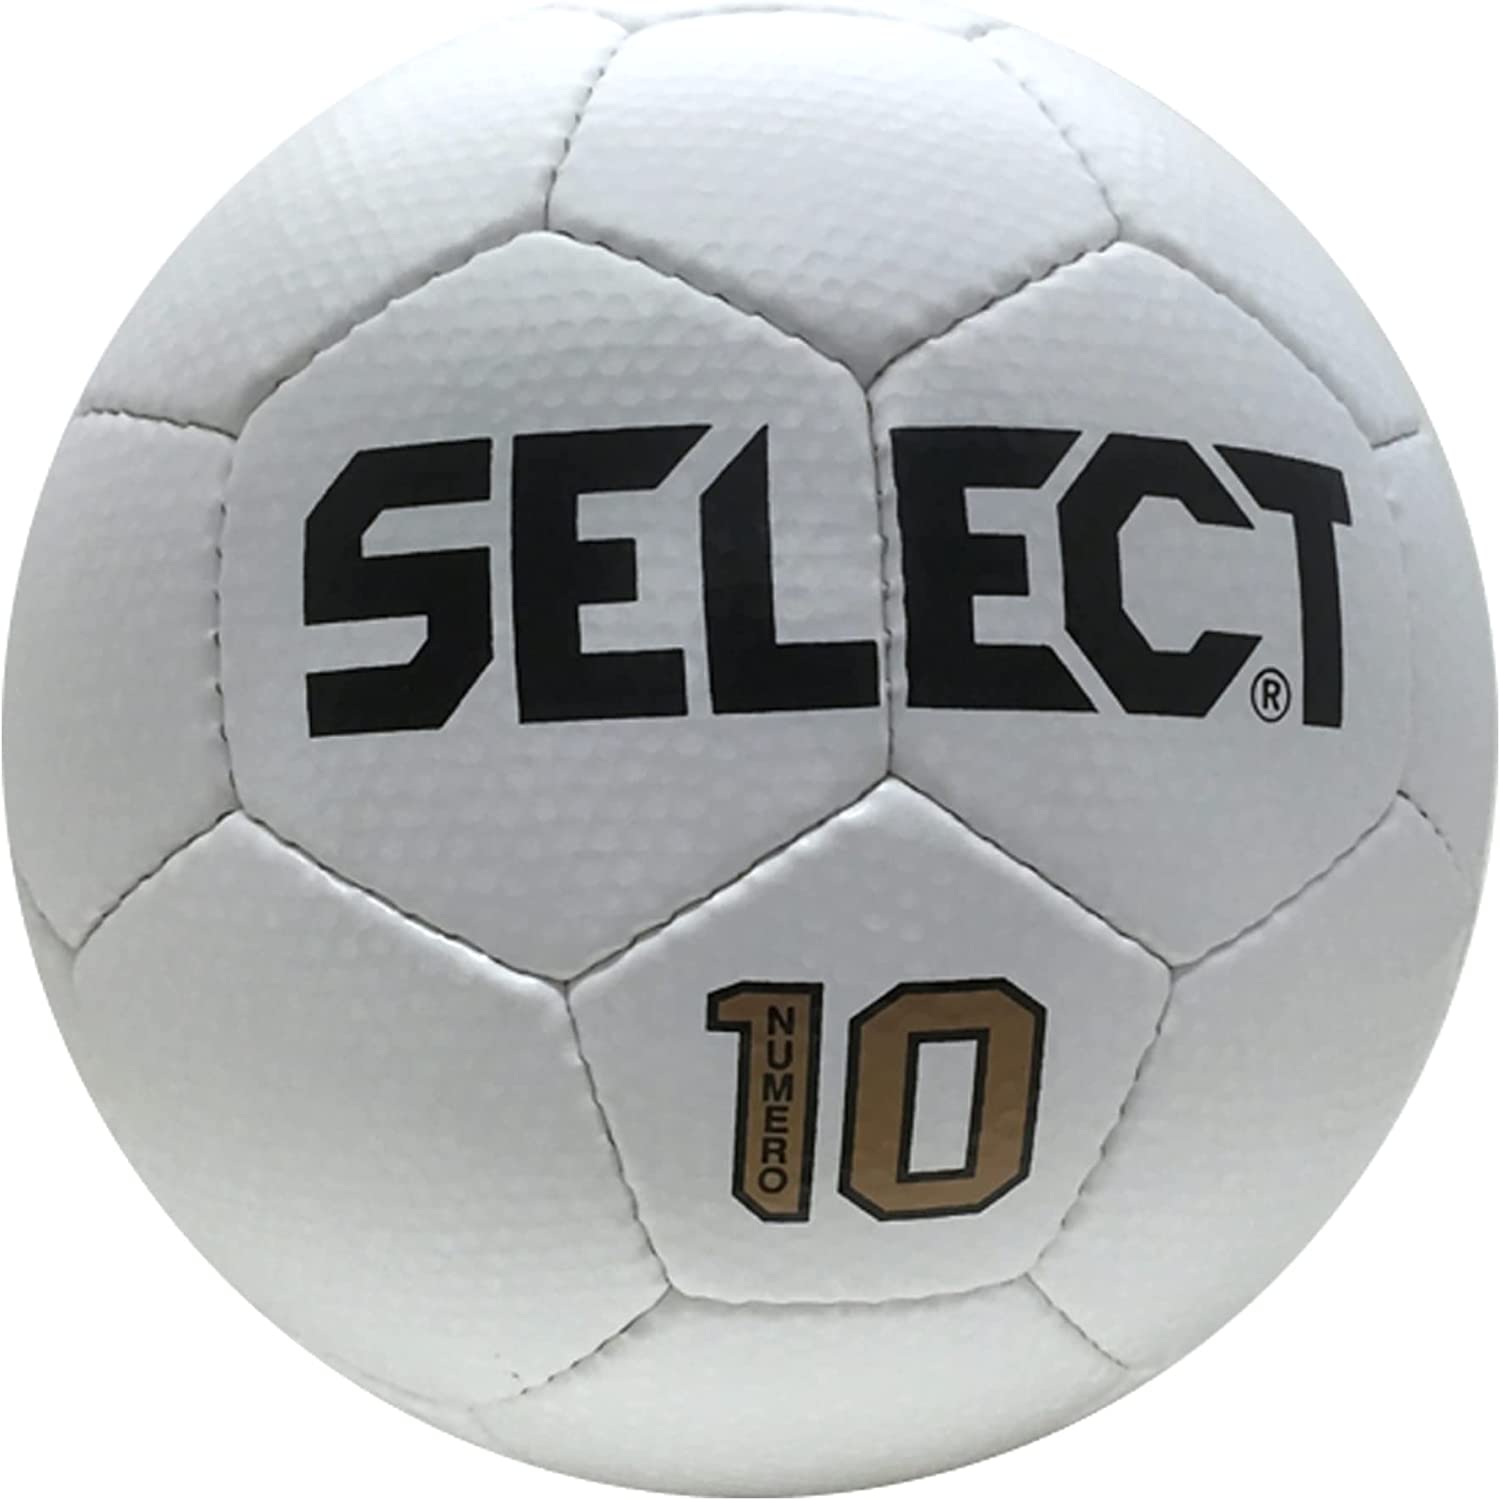 white soccer ball with black text